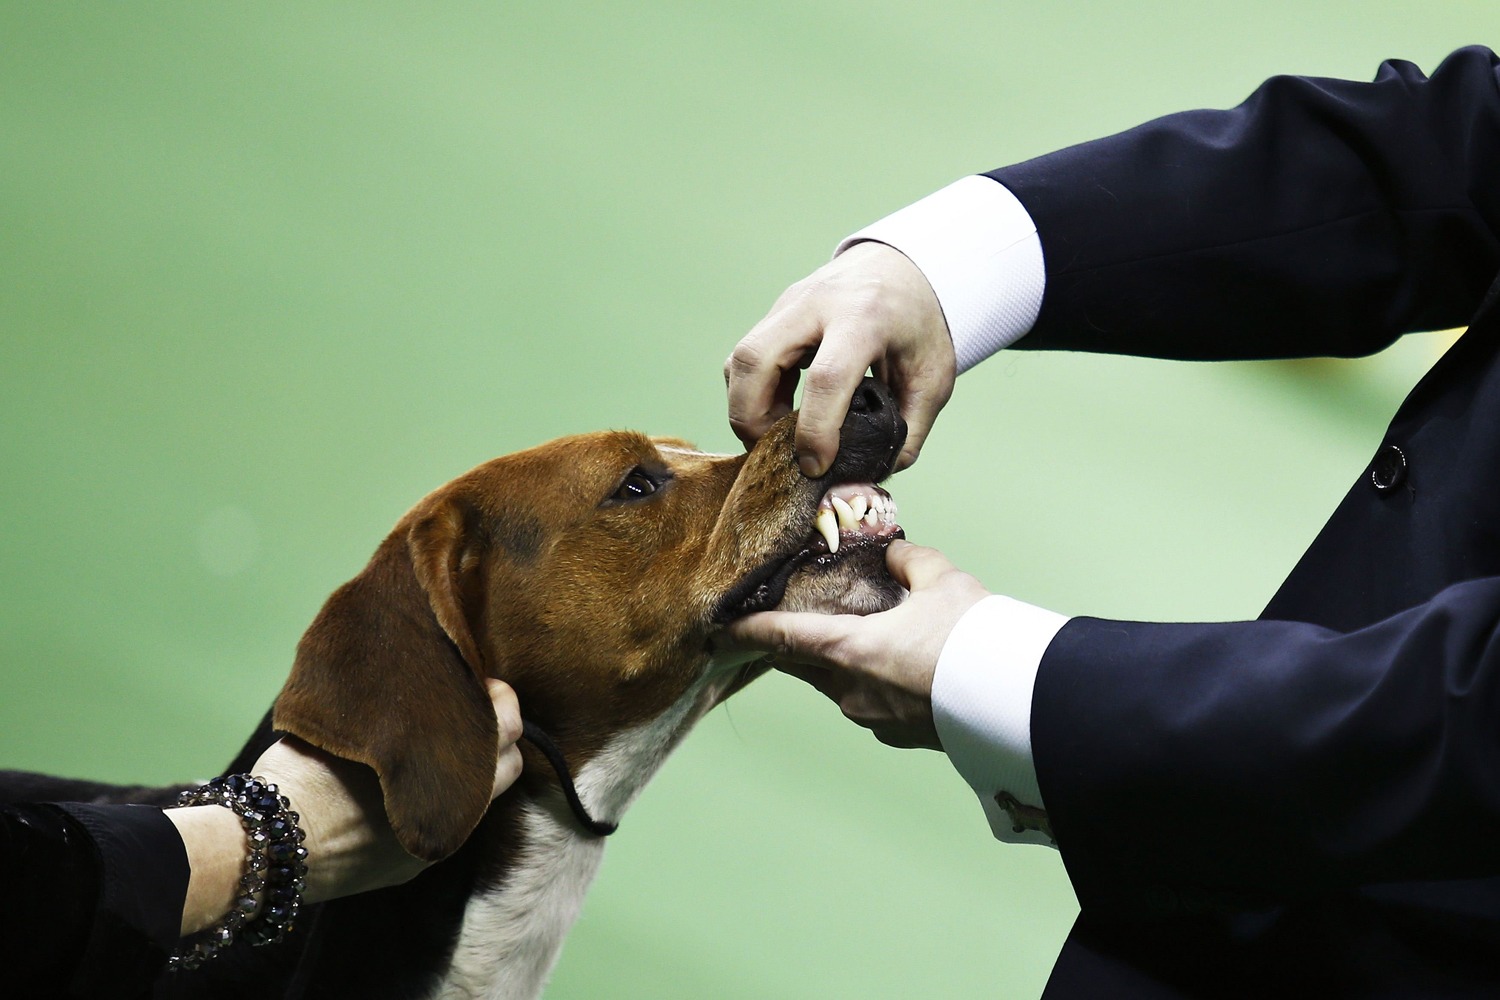 Feb. 10, 2014. A Treeing Walker Coonhound is judged during competition at the Hound group during day one of judging of the 2014 Westminster Kennel Club Dog Show in New York.